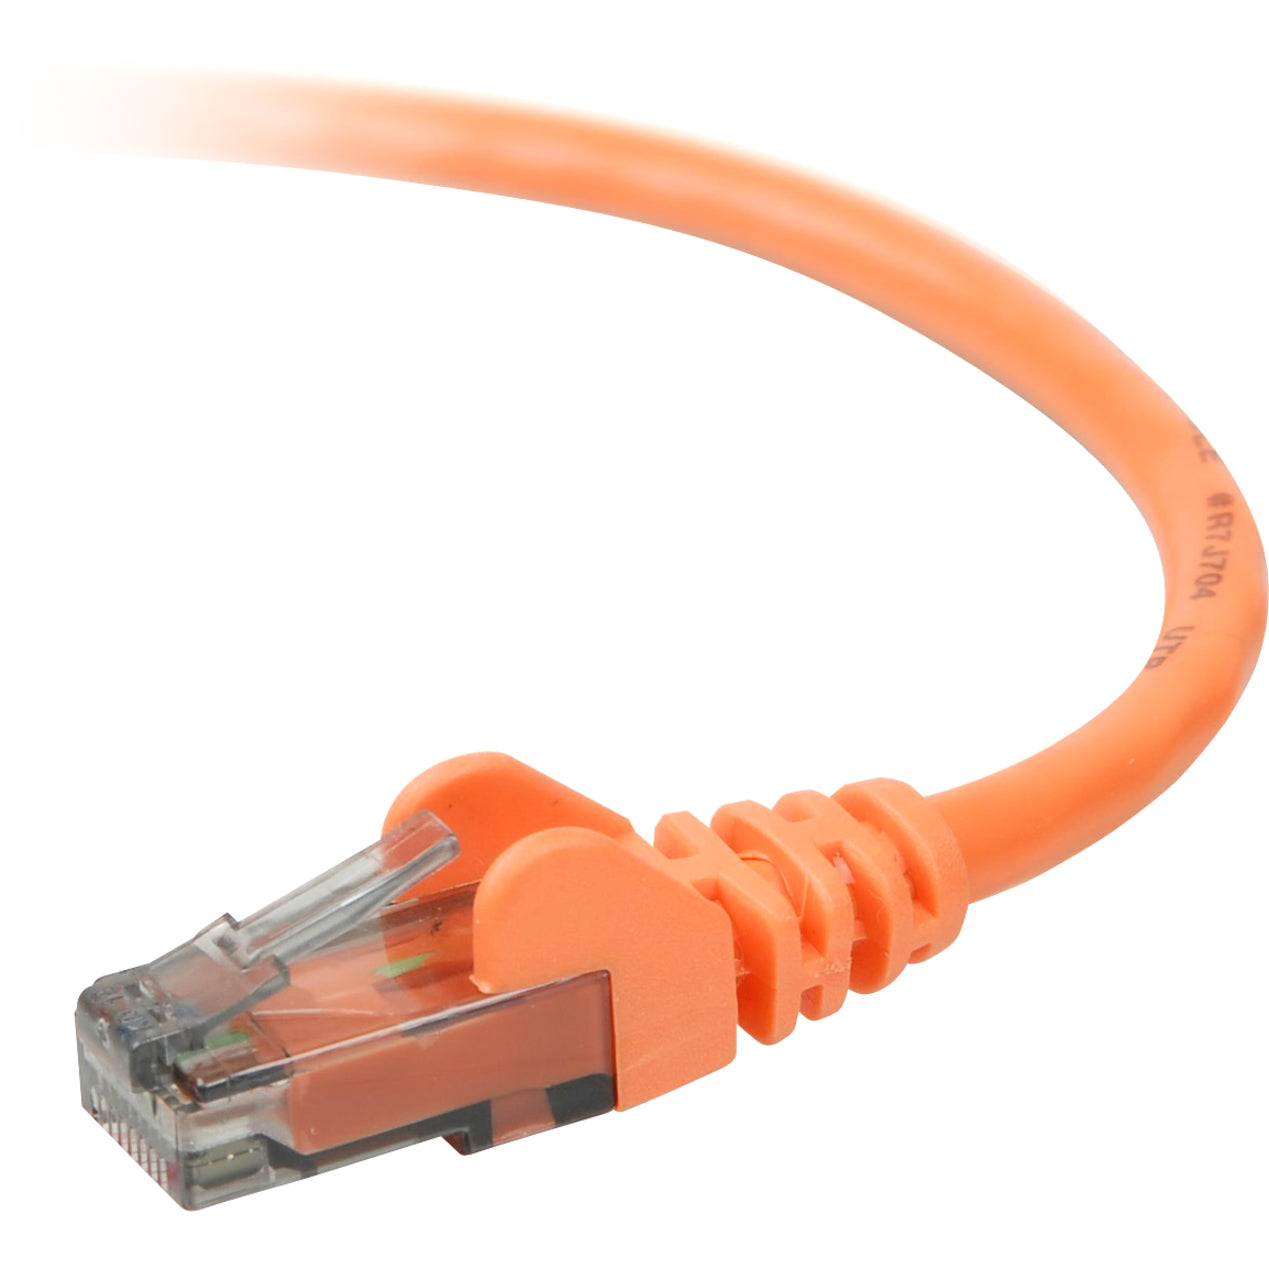 Belkin A3L980-25-ORG-S 900 Series Cat. 6 UTP Patch Cable, 25 ft, Snagless, Orange